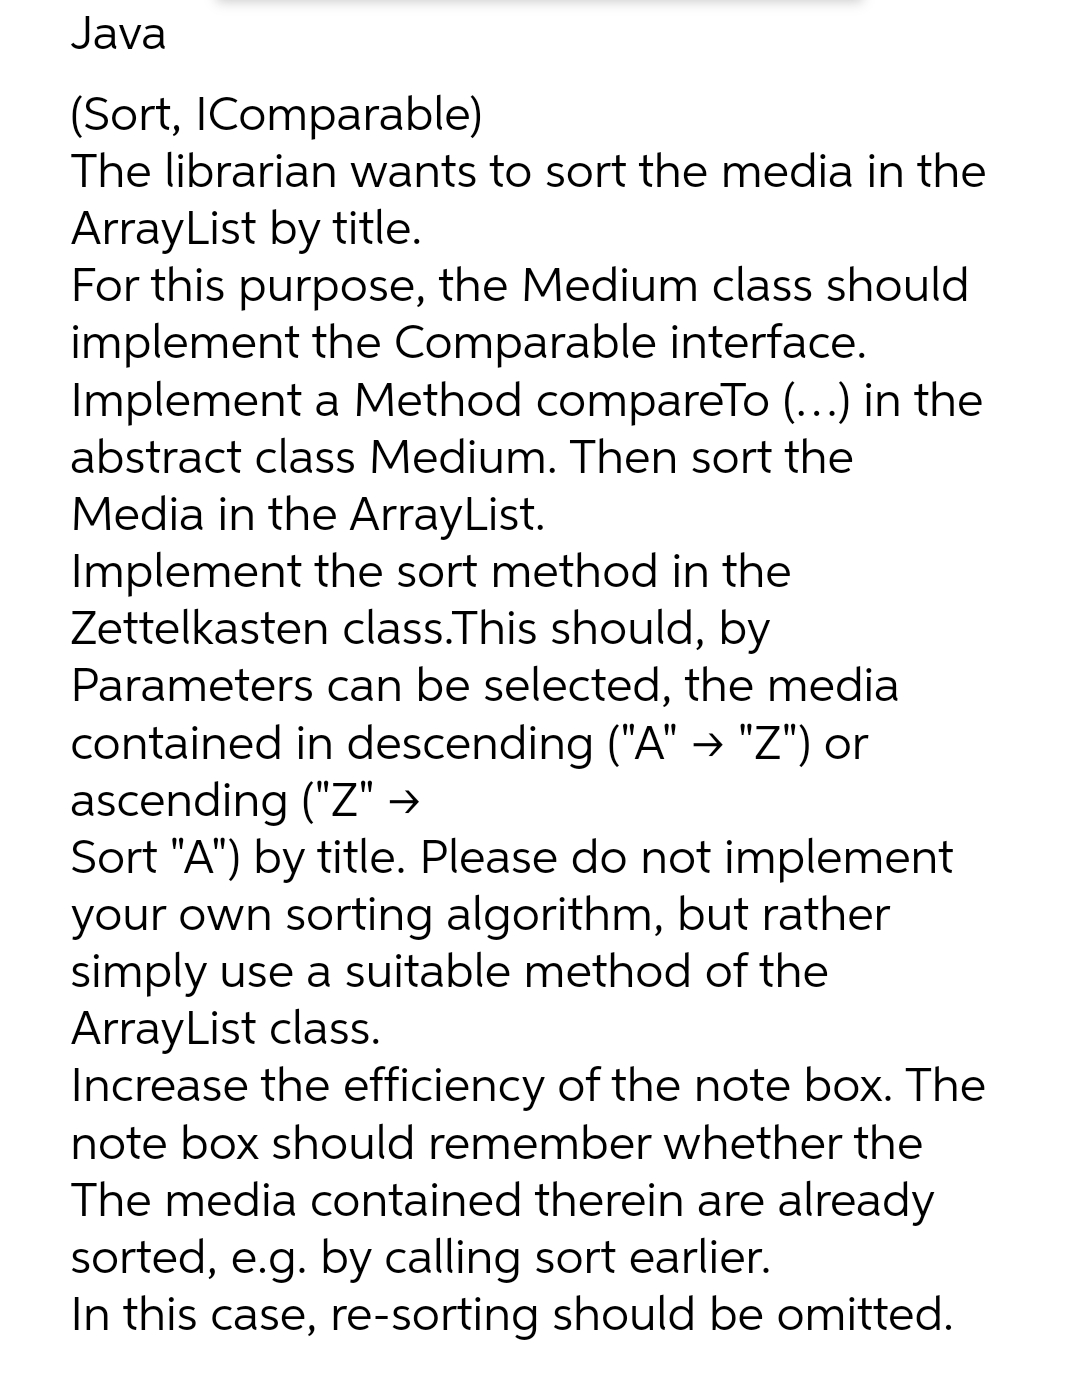 Java
(Sort, IComparable)
The librarian wants to sort the media in the
ArrayList by title.
For this purpose, the Medium class should
implement the Comparable interface.
Implement a Method compareTo (...) in the
abstract class Medium. Then sort the
Media in the ArrayList.
Implement the sort method in the
Zettelkasten class.This should, by
Parameters can be selected, the media
contained in descending ("A" → "Z") or
ascending ("Z" →
Sort "A") by title. Please do not implement
your own sorting algorithm, but rather
simply use a suitable method of the
ArrayList class.
Increase the efficiency of the note box. The
note box should remember whether the
The media contained therein are already
sorted, e.g. by calling sort earlier.
In this case, re-sorting should be omitted.
